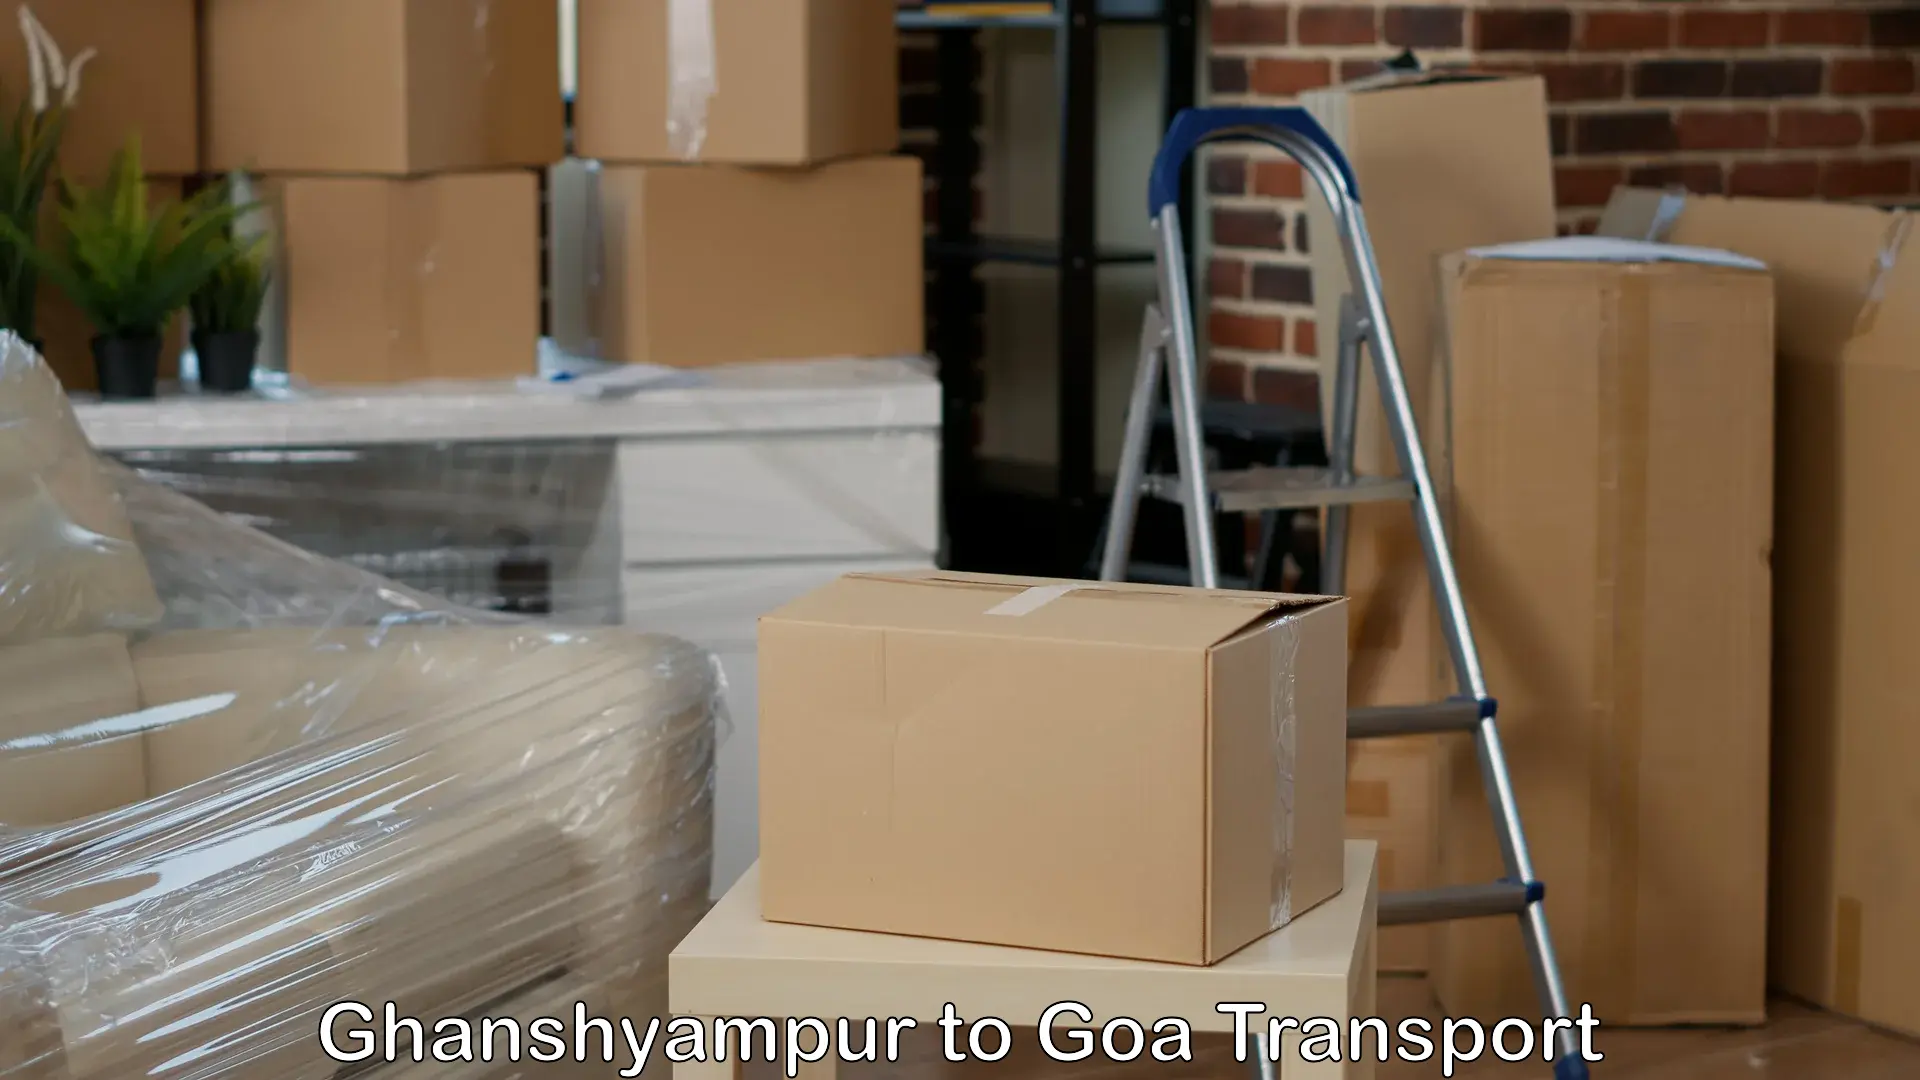 Transport shared services Ghanshyampur to Margao